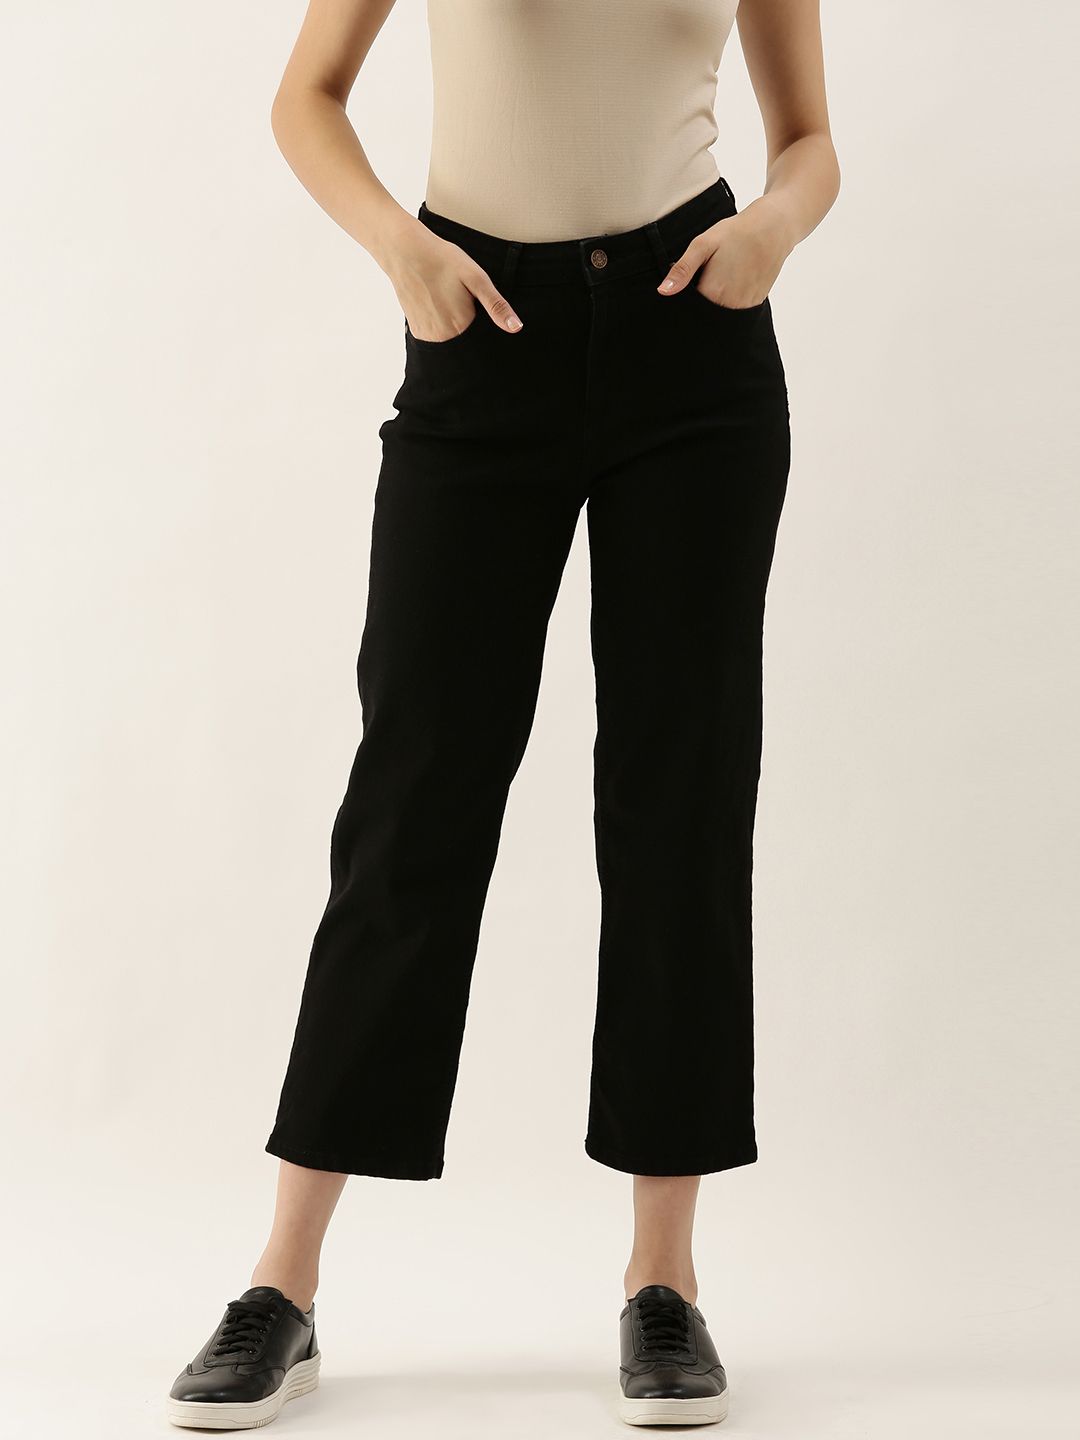 AND Women Black Relaxed Fit Stretchable Jeans Price in India